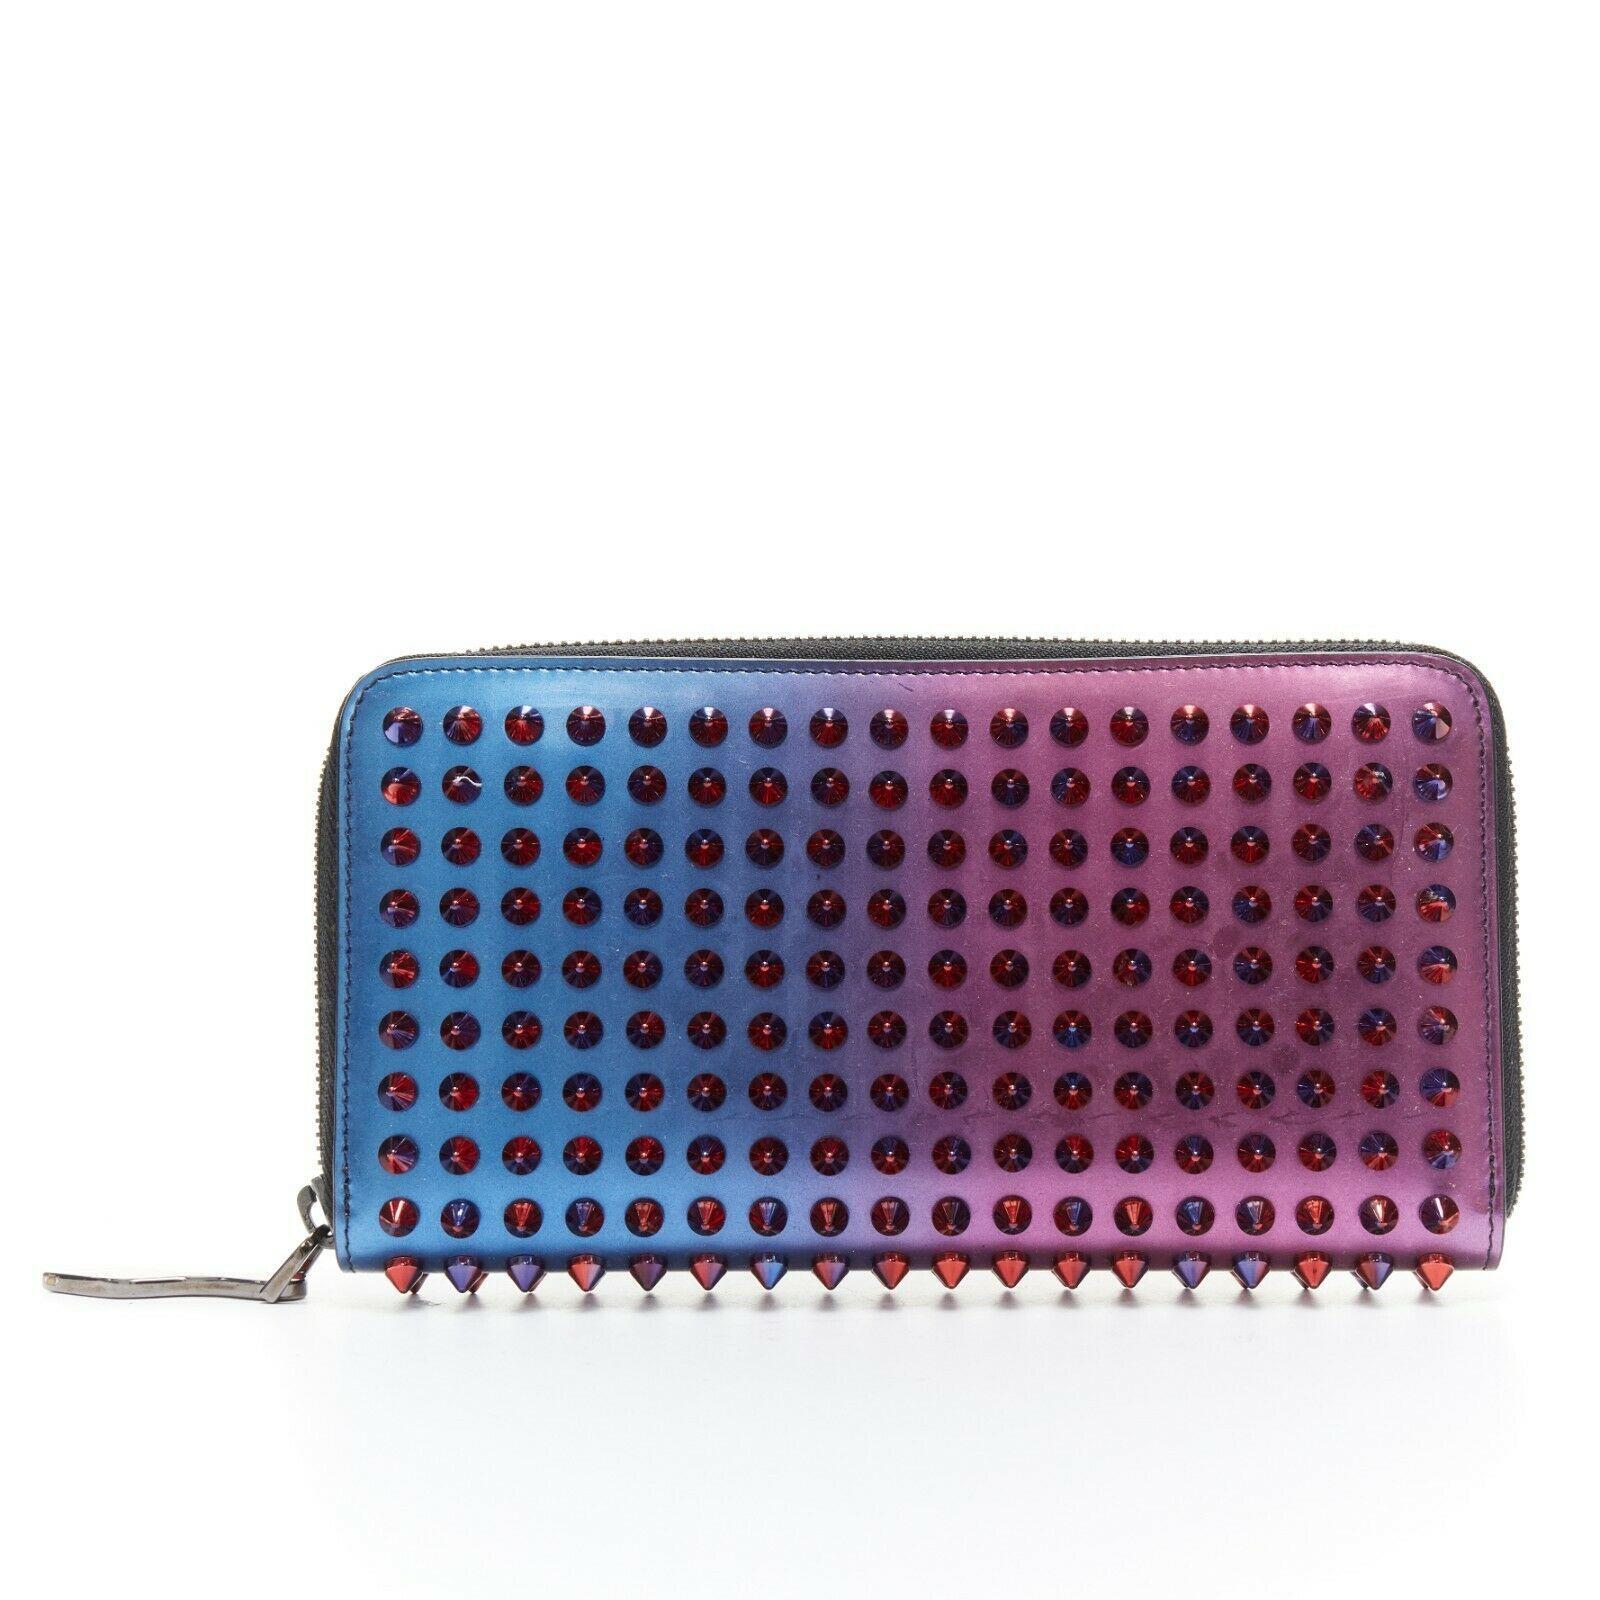 CHRISTIAN LOUBOUTIN Panettone purple blue red metallic ombre leather stud wallet
Designer: CHRISTIAN LOUBOUTIN
Model / Season: Panettone
Material: Leather
Color: blue, purplePattern: ombre
Description: 
Elongated rectangular continental wallet.